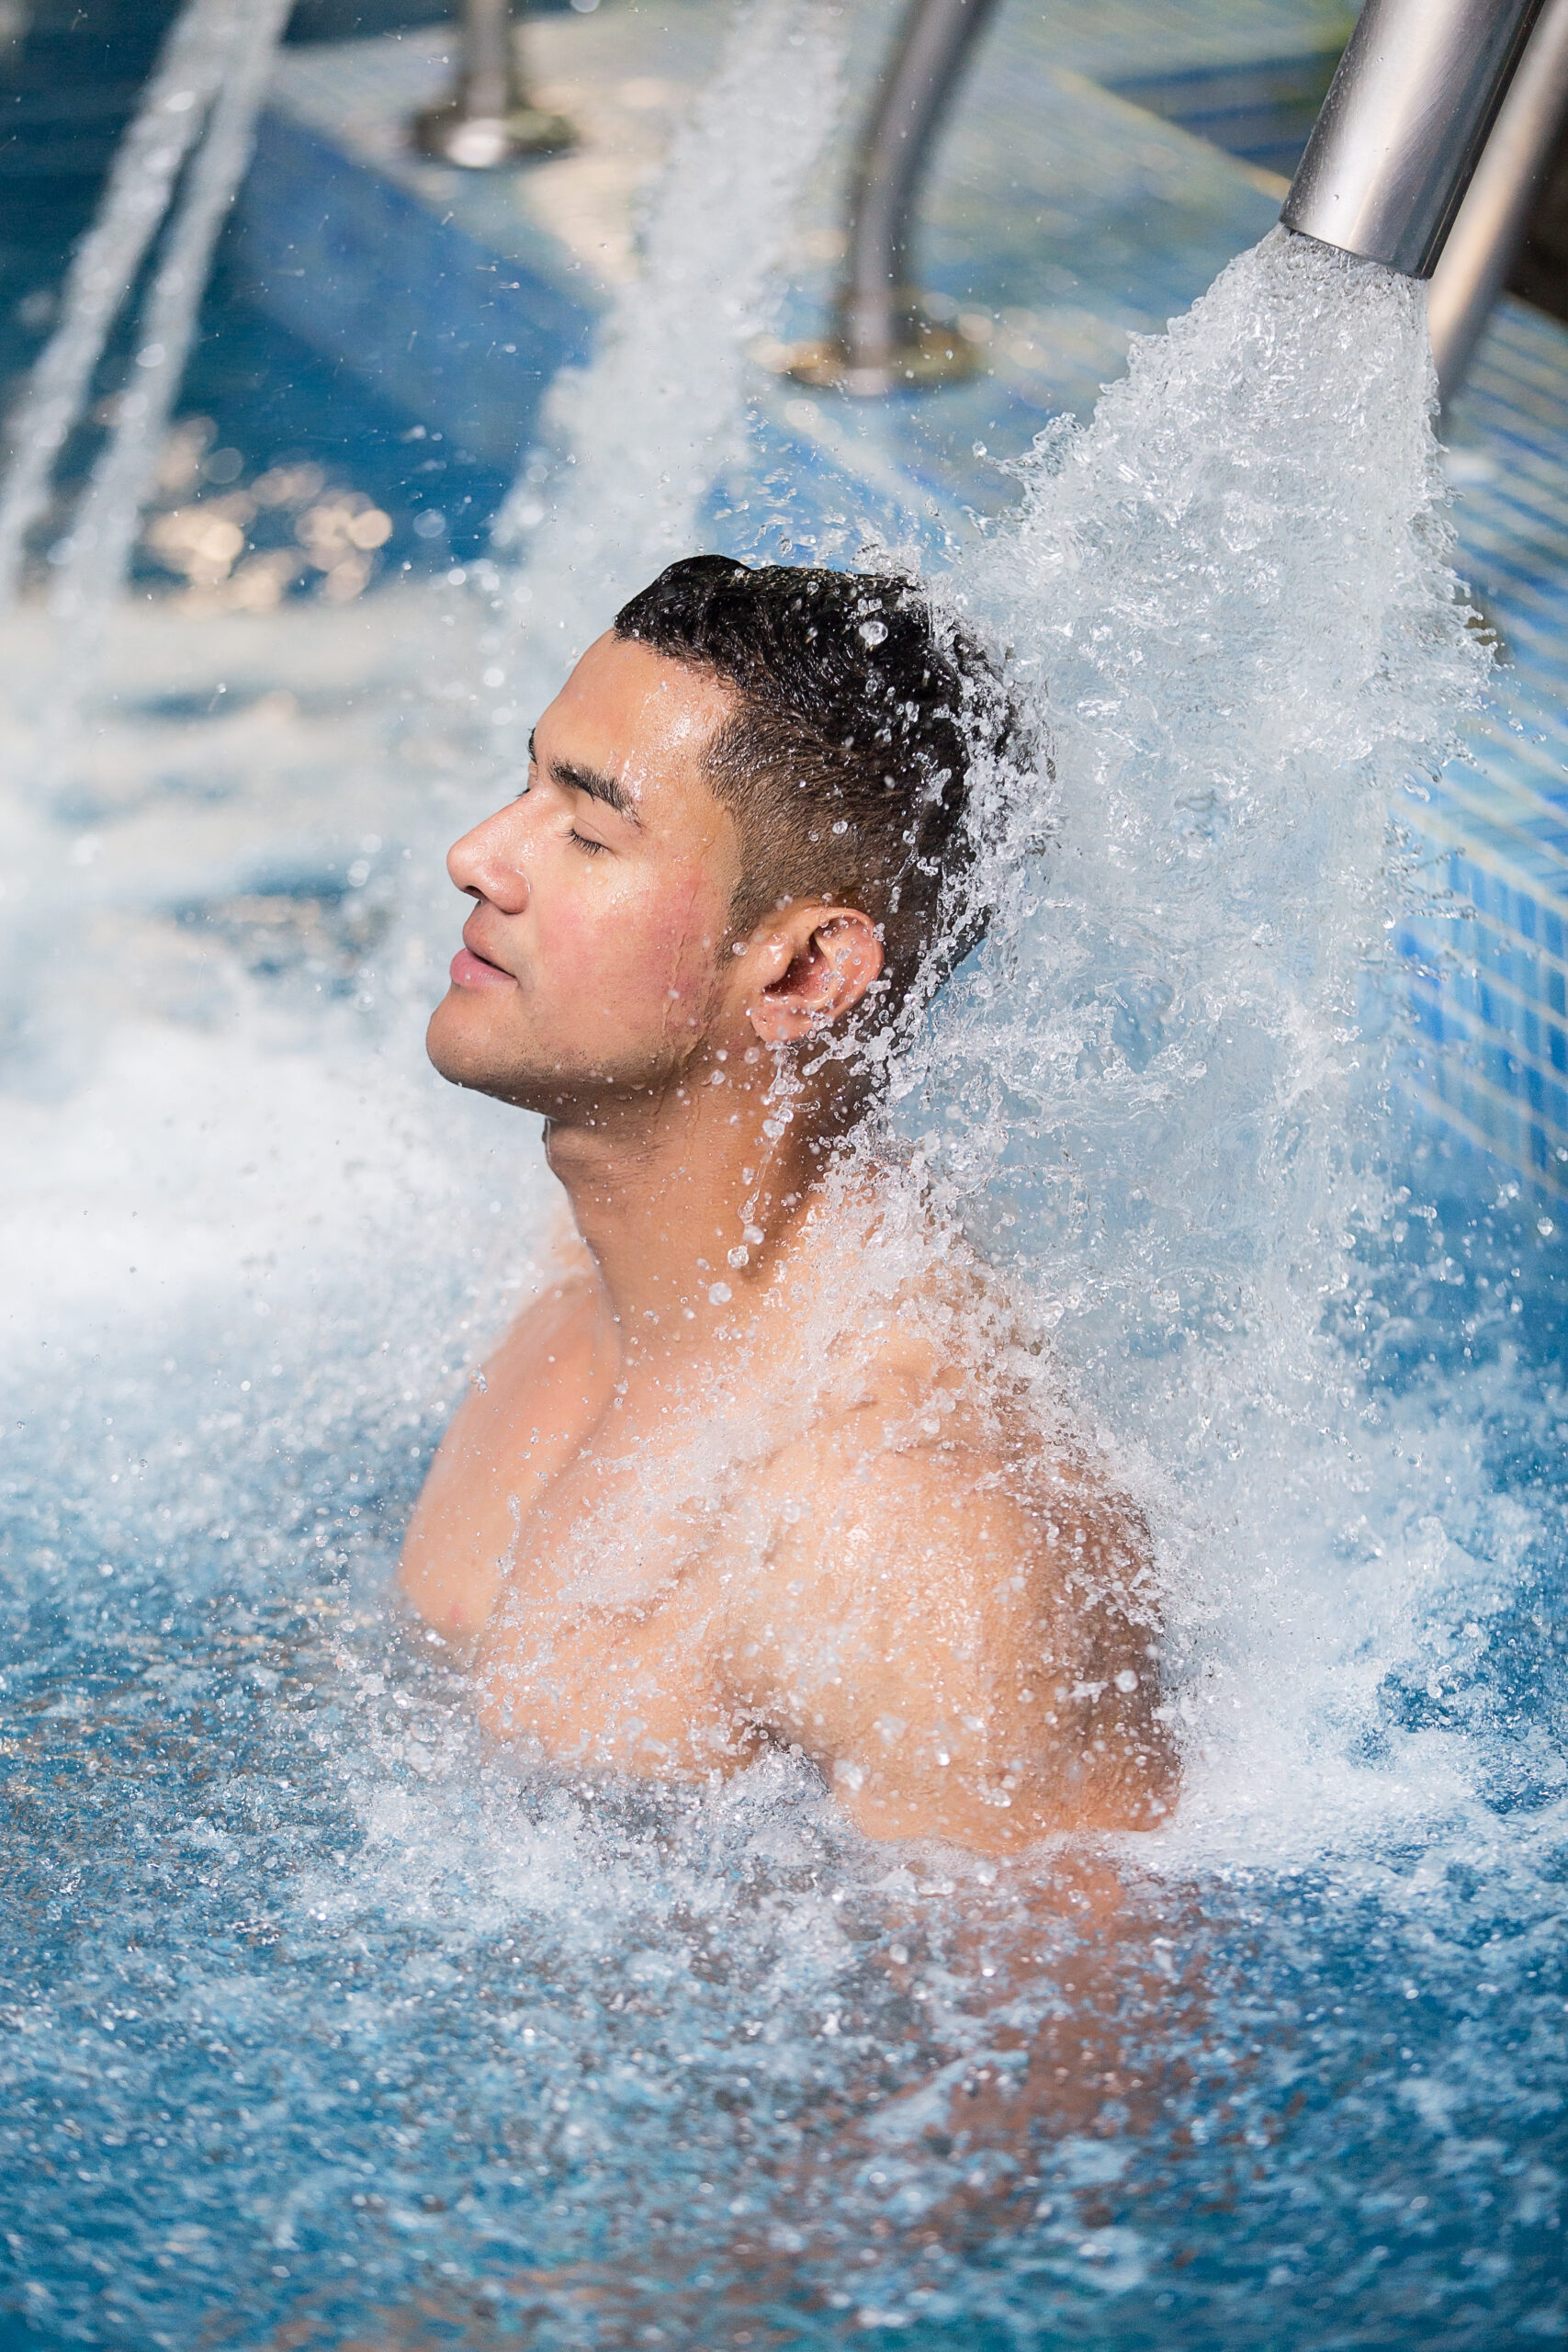 A man experiencing integrated hydrotherapy in a pool with soothing waterfalls, enjoying the therapeutic benefits of the cascading water for relaxation and well-being.